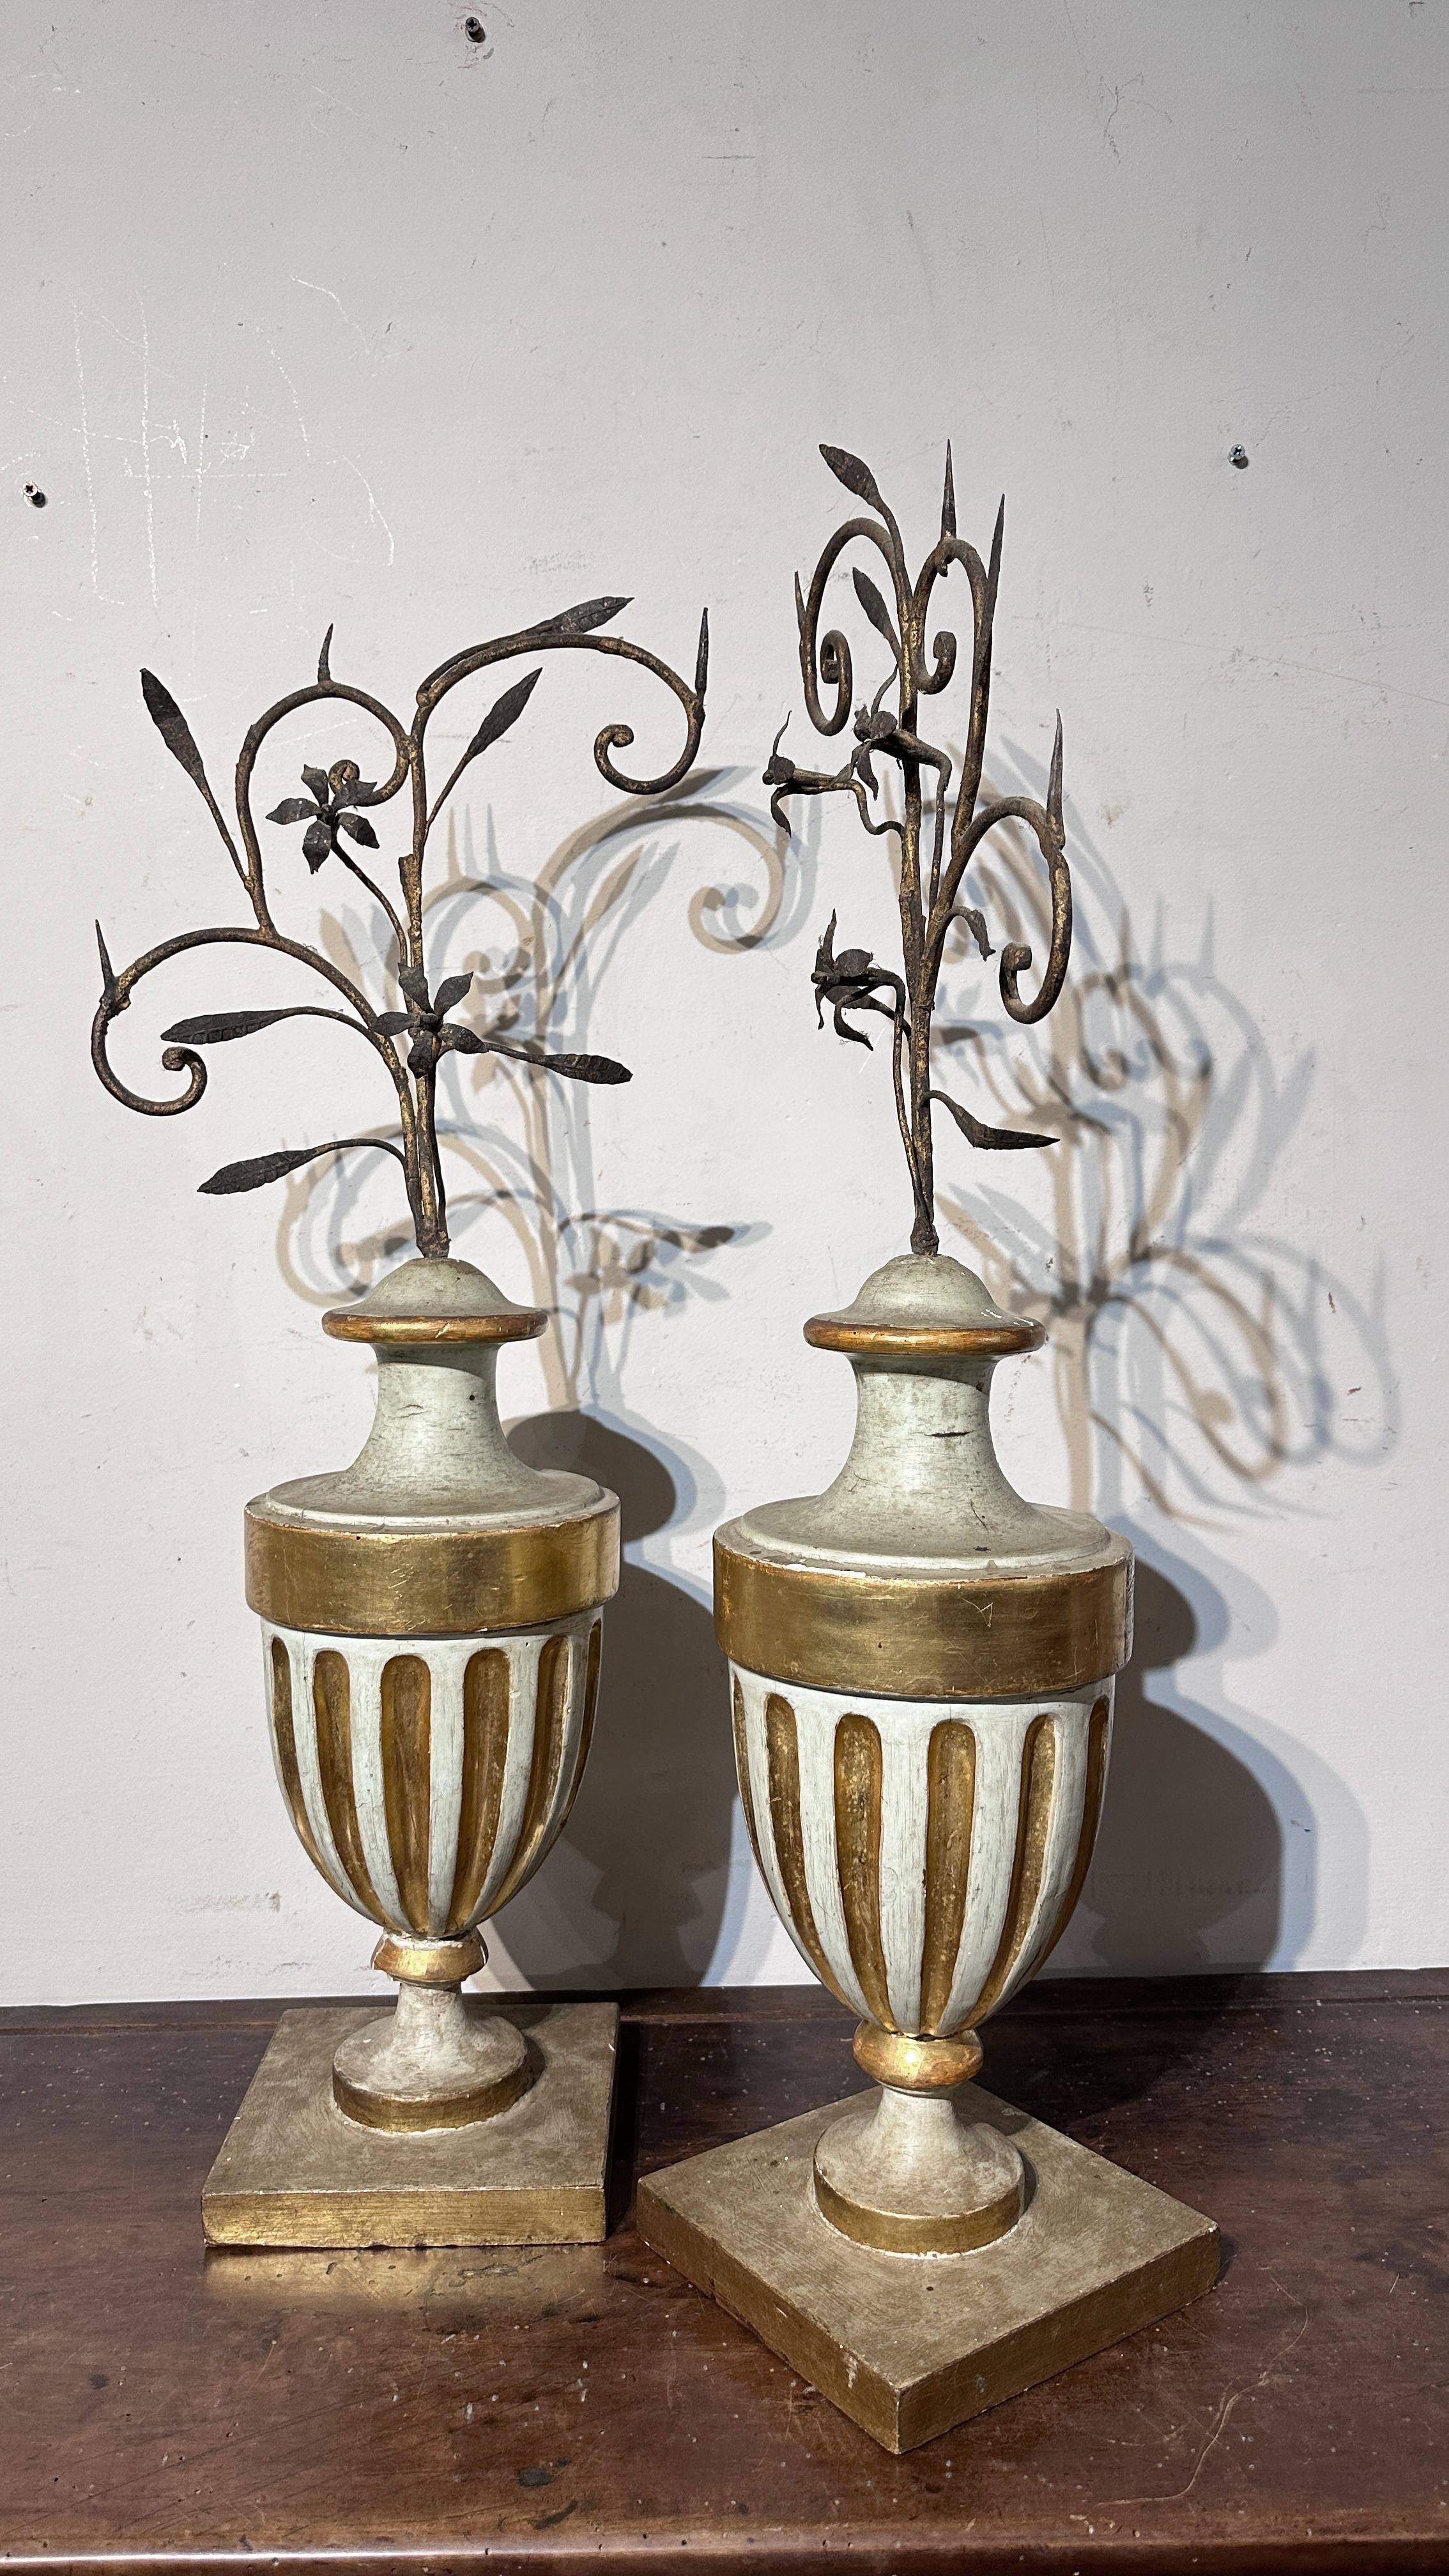 Neoclassical Revival 18th CENTURY NEOCLASSIC PERIOD PAIR VASES FOR PALM TREE  For Sale